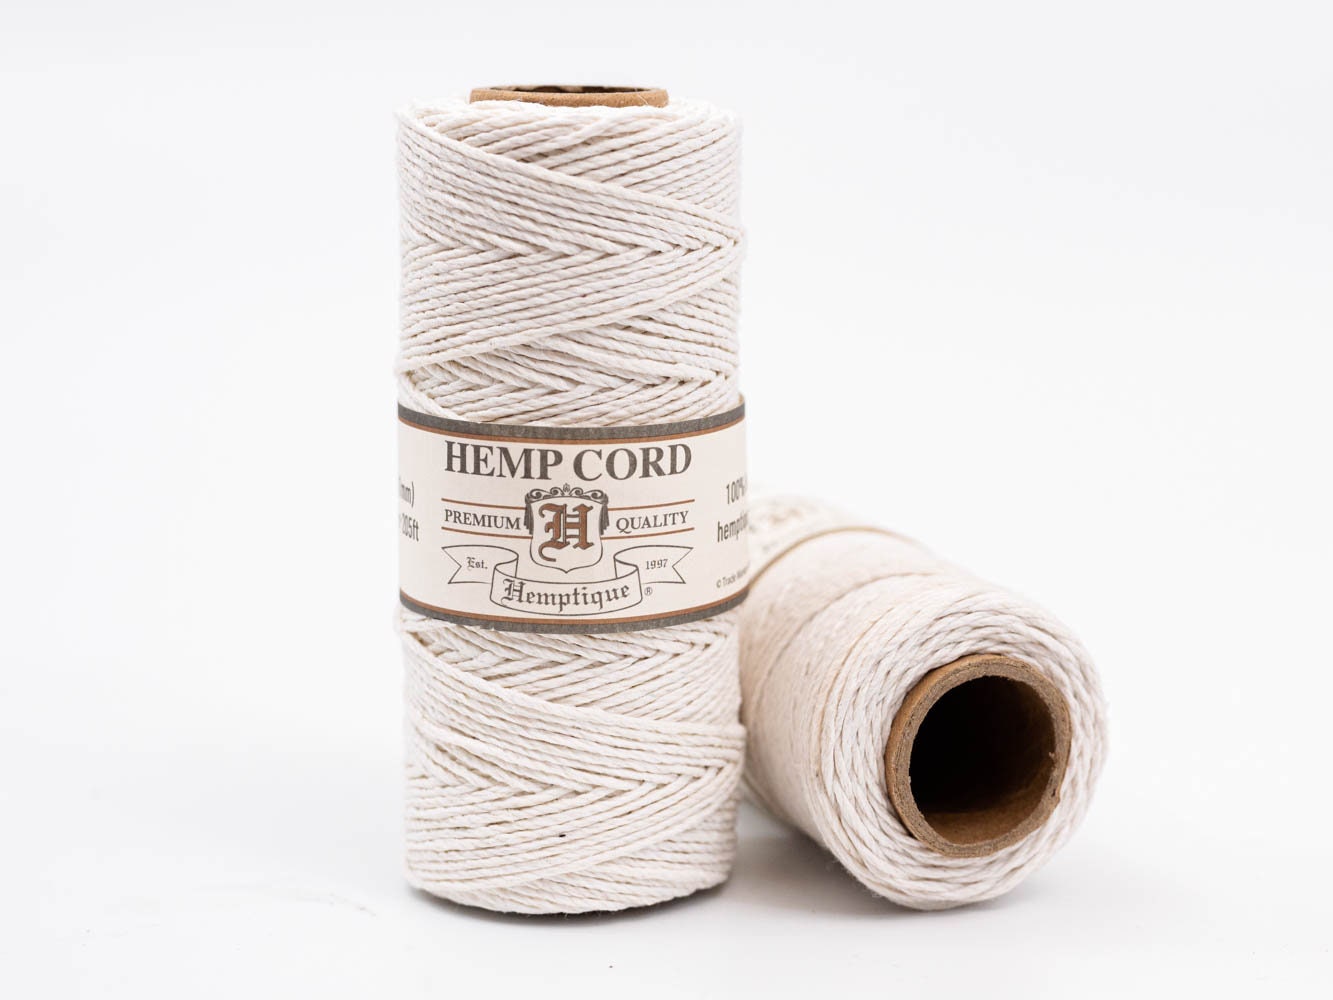 Hemptique 100% Hemp Cord Ball - 122 Meter Hemp String - 1 mm Cord Thread  for Jewelry Making, Macrame, Greeting Cards & More - Multi Packs and Colors